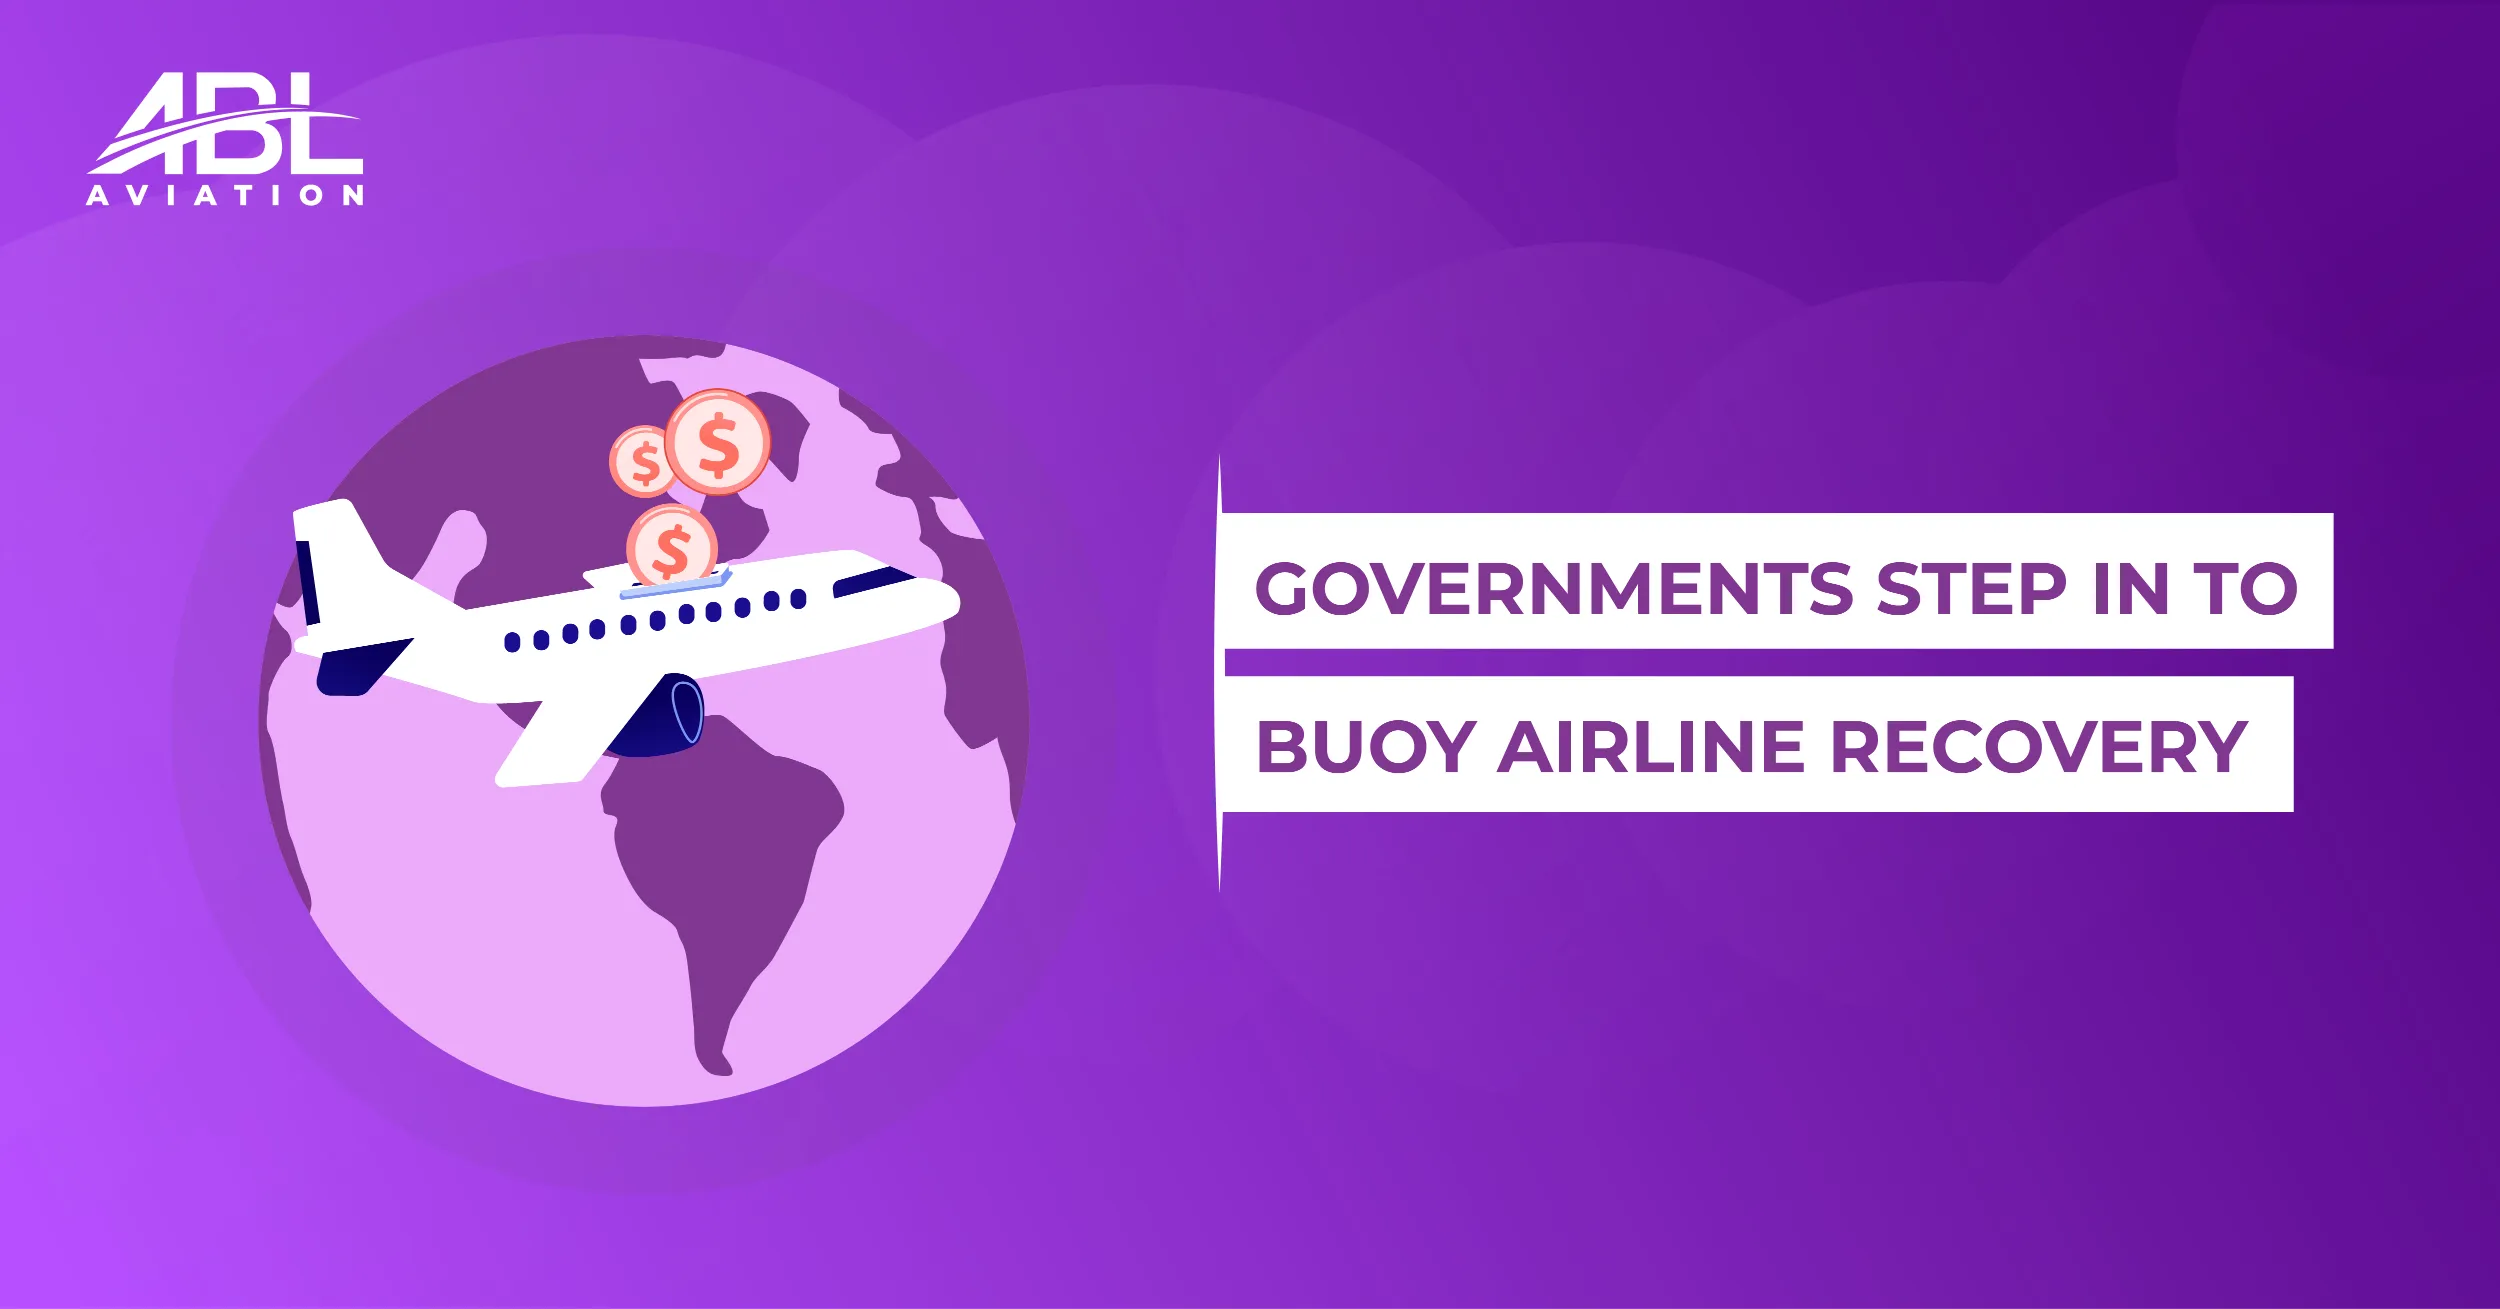 ABL Aviation Releases the November 2021 Insights Report – “Governments Step In to Buoy Airline Recovery.”